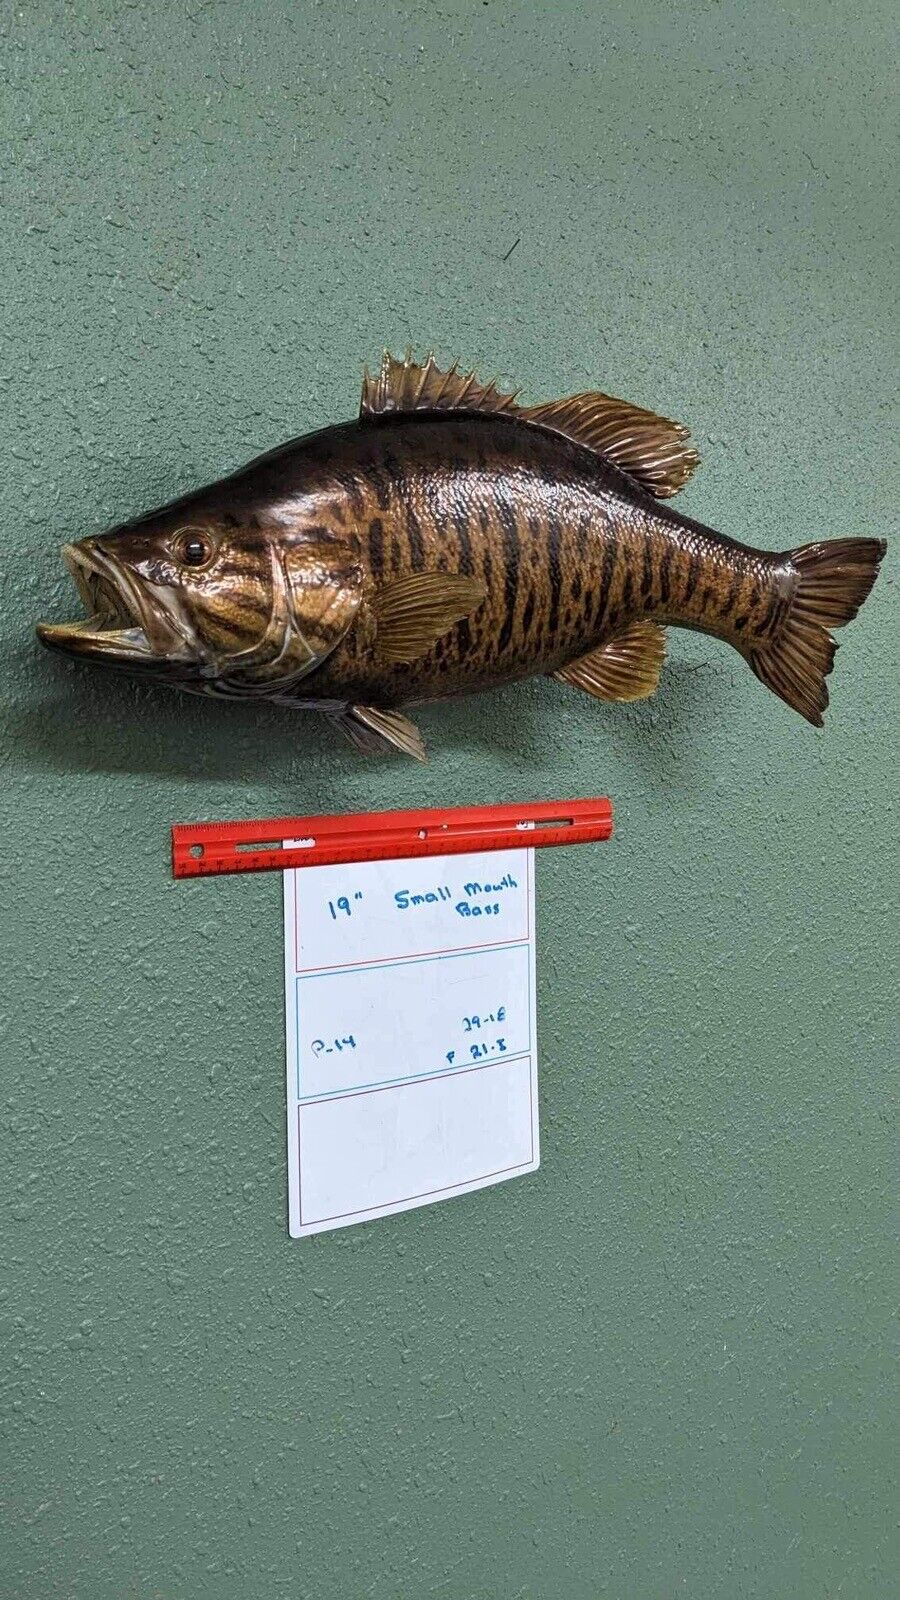 Beautiful Real Skin 19” Small Mouth Bass Taxidermy Wall Mount Art Wildlife